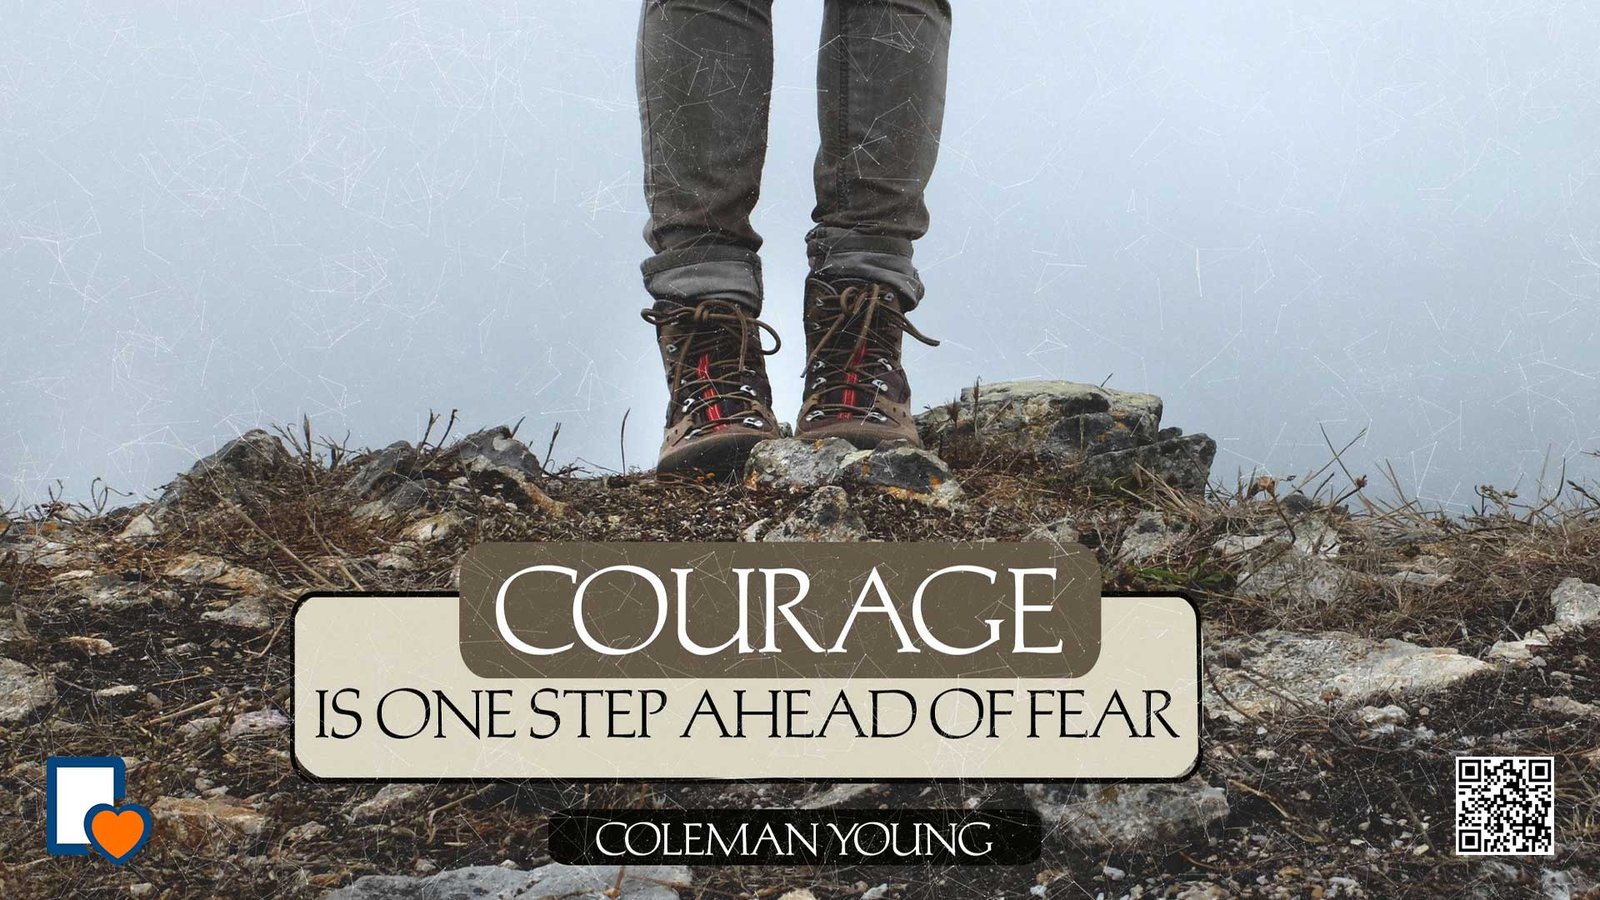 Wednesday, July 6, 2022 22:42 PM Courage Is One Step Ahead Of Fear. -Coleman Young